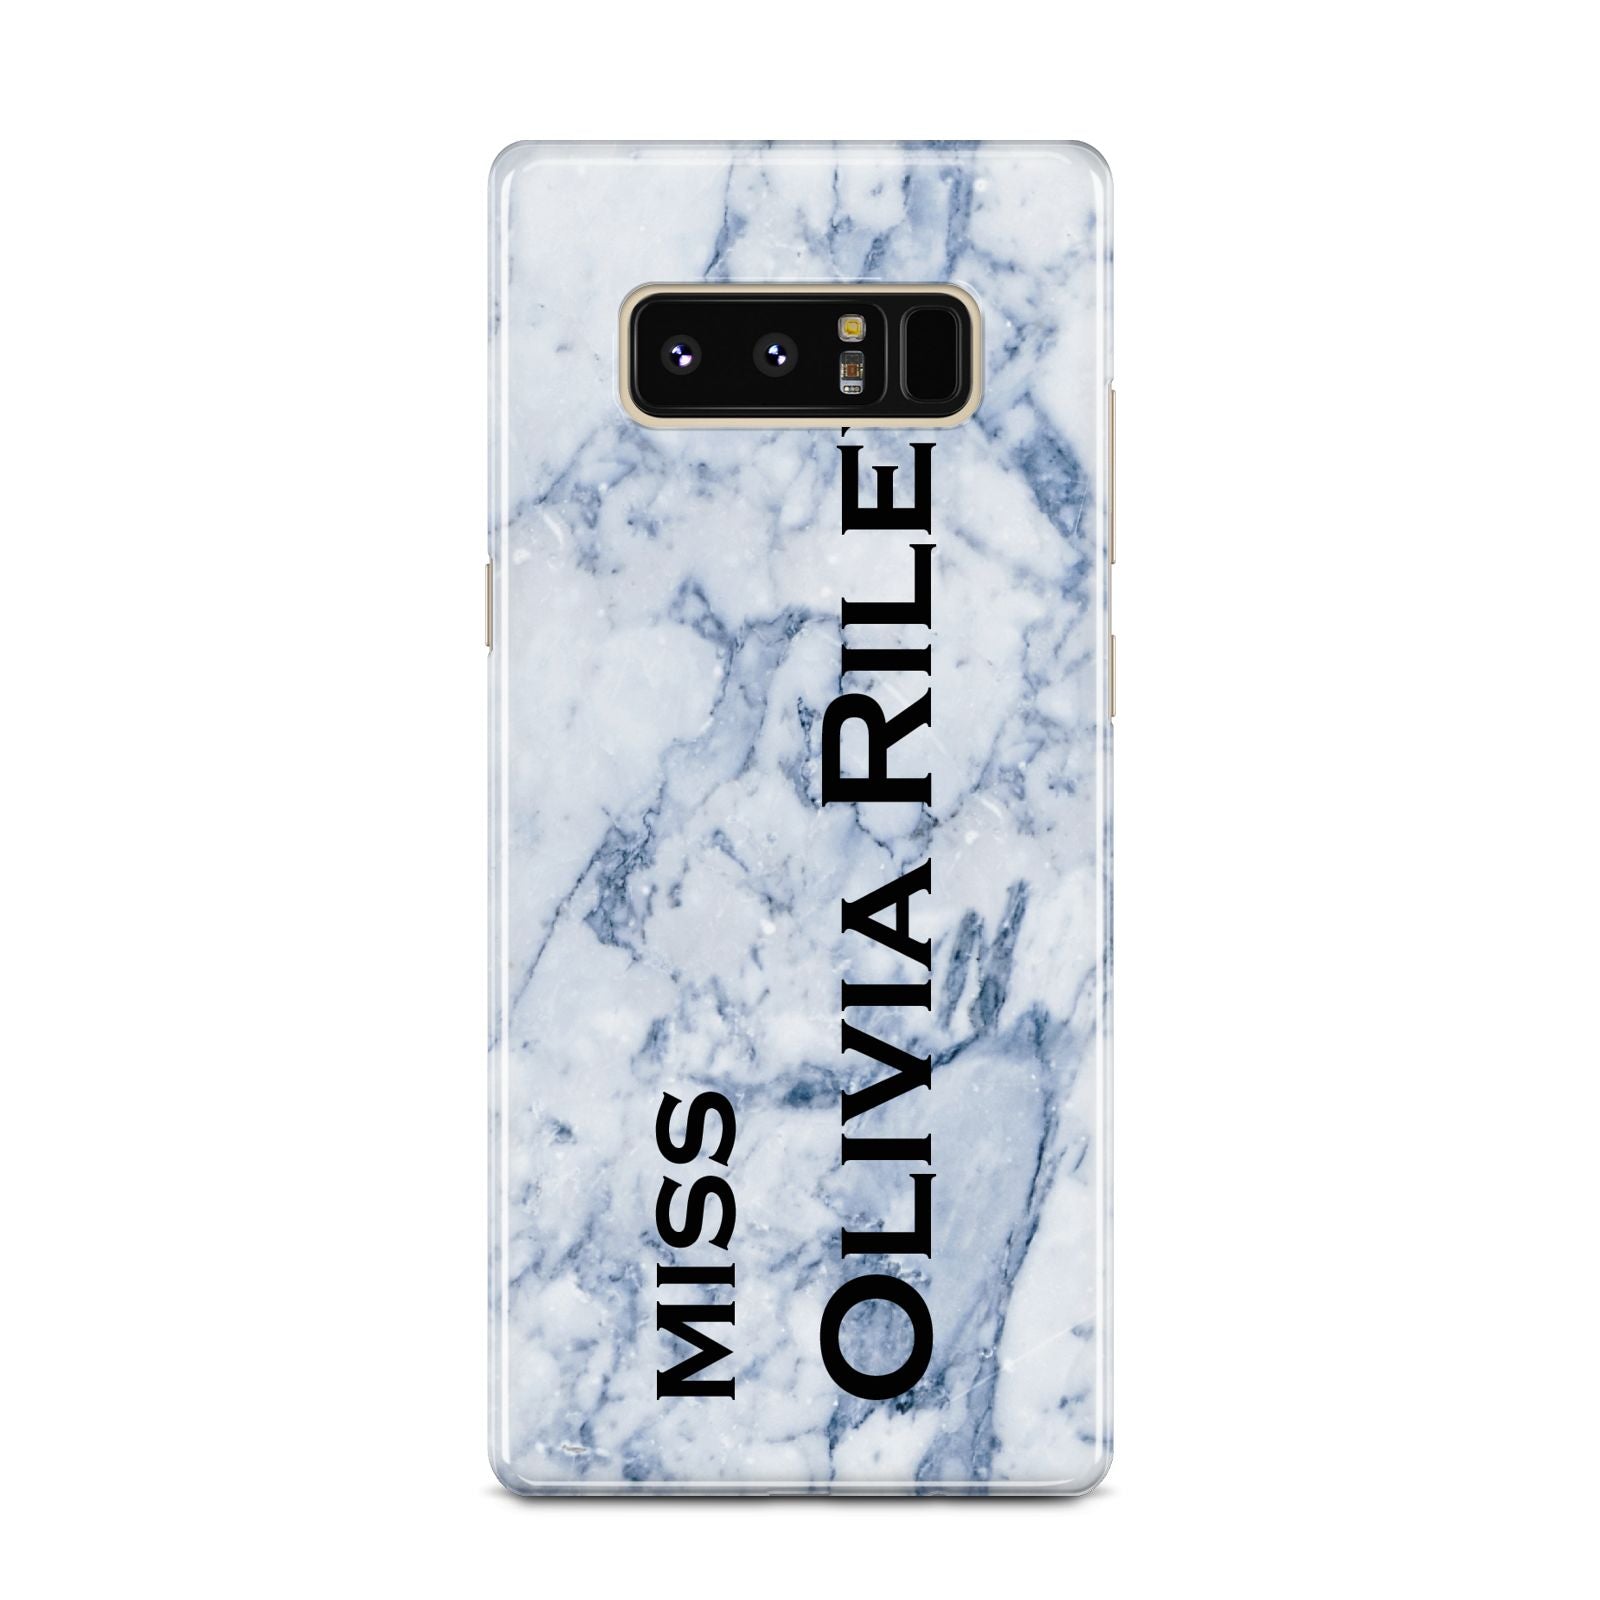 Full Name Grey Marble Samsung Galaxy Note 8 Case